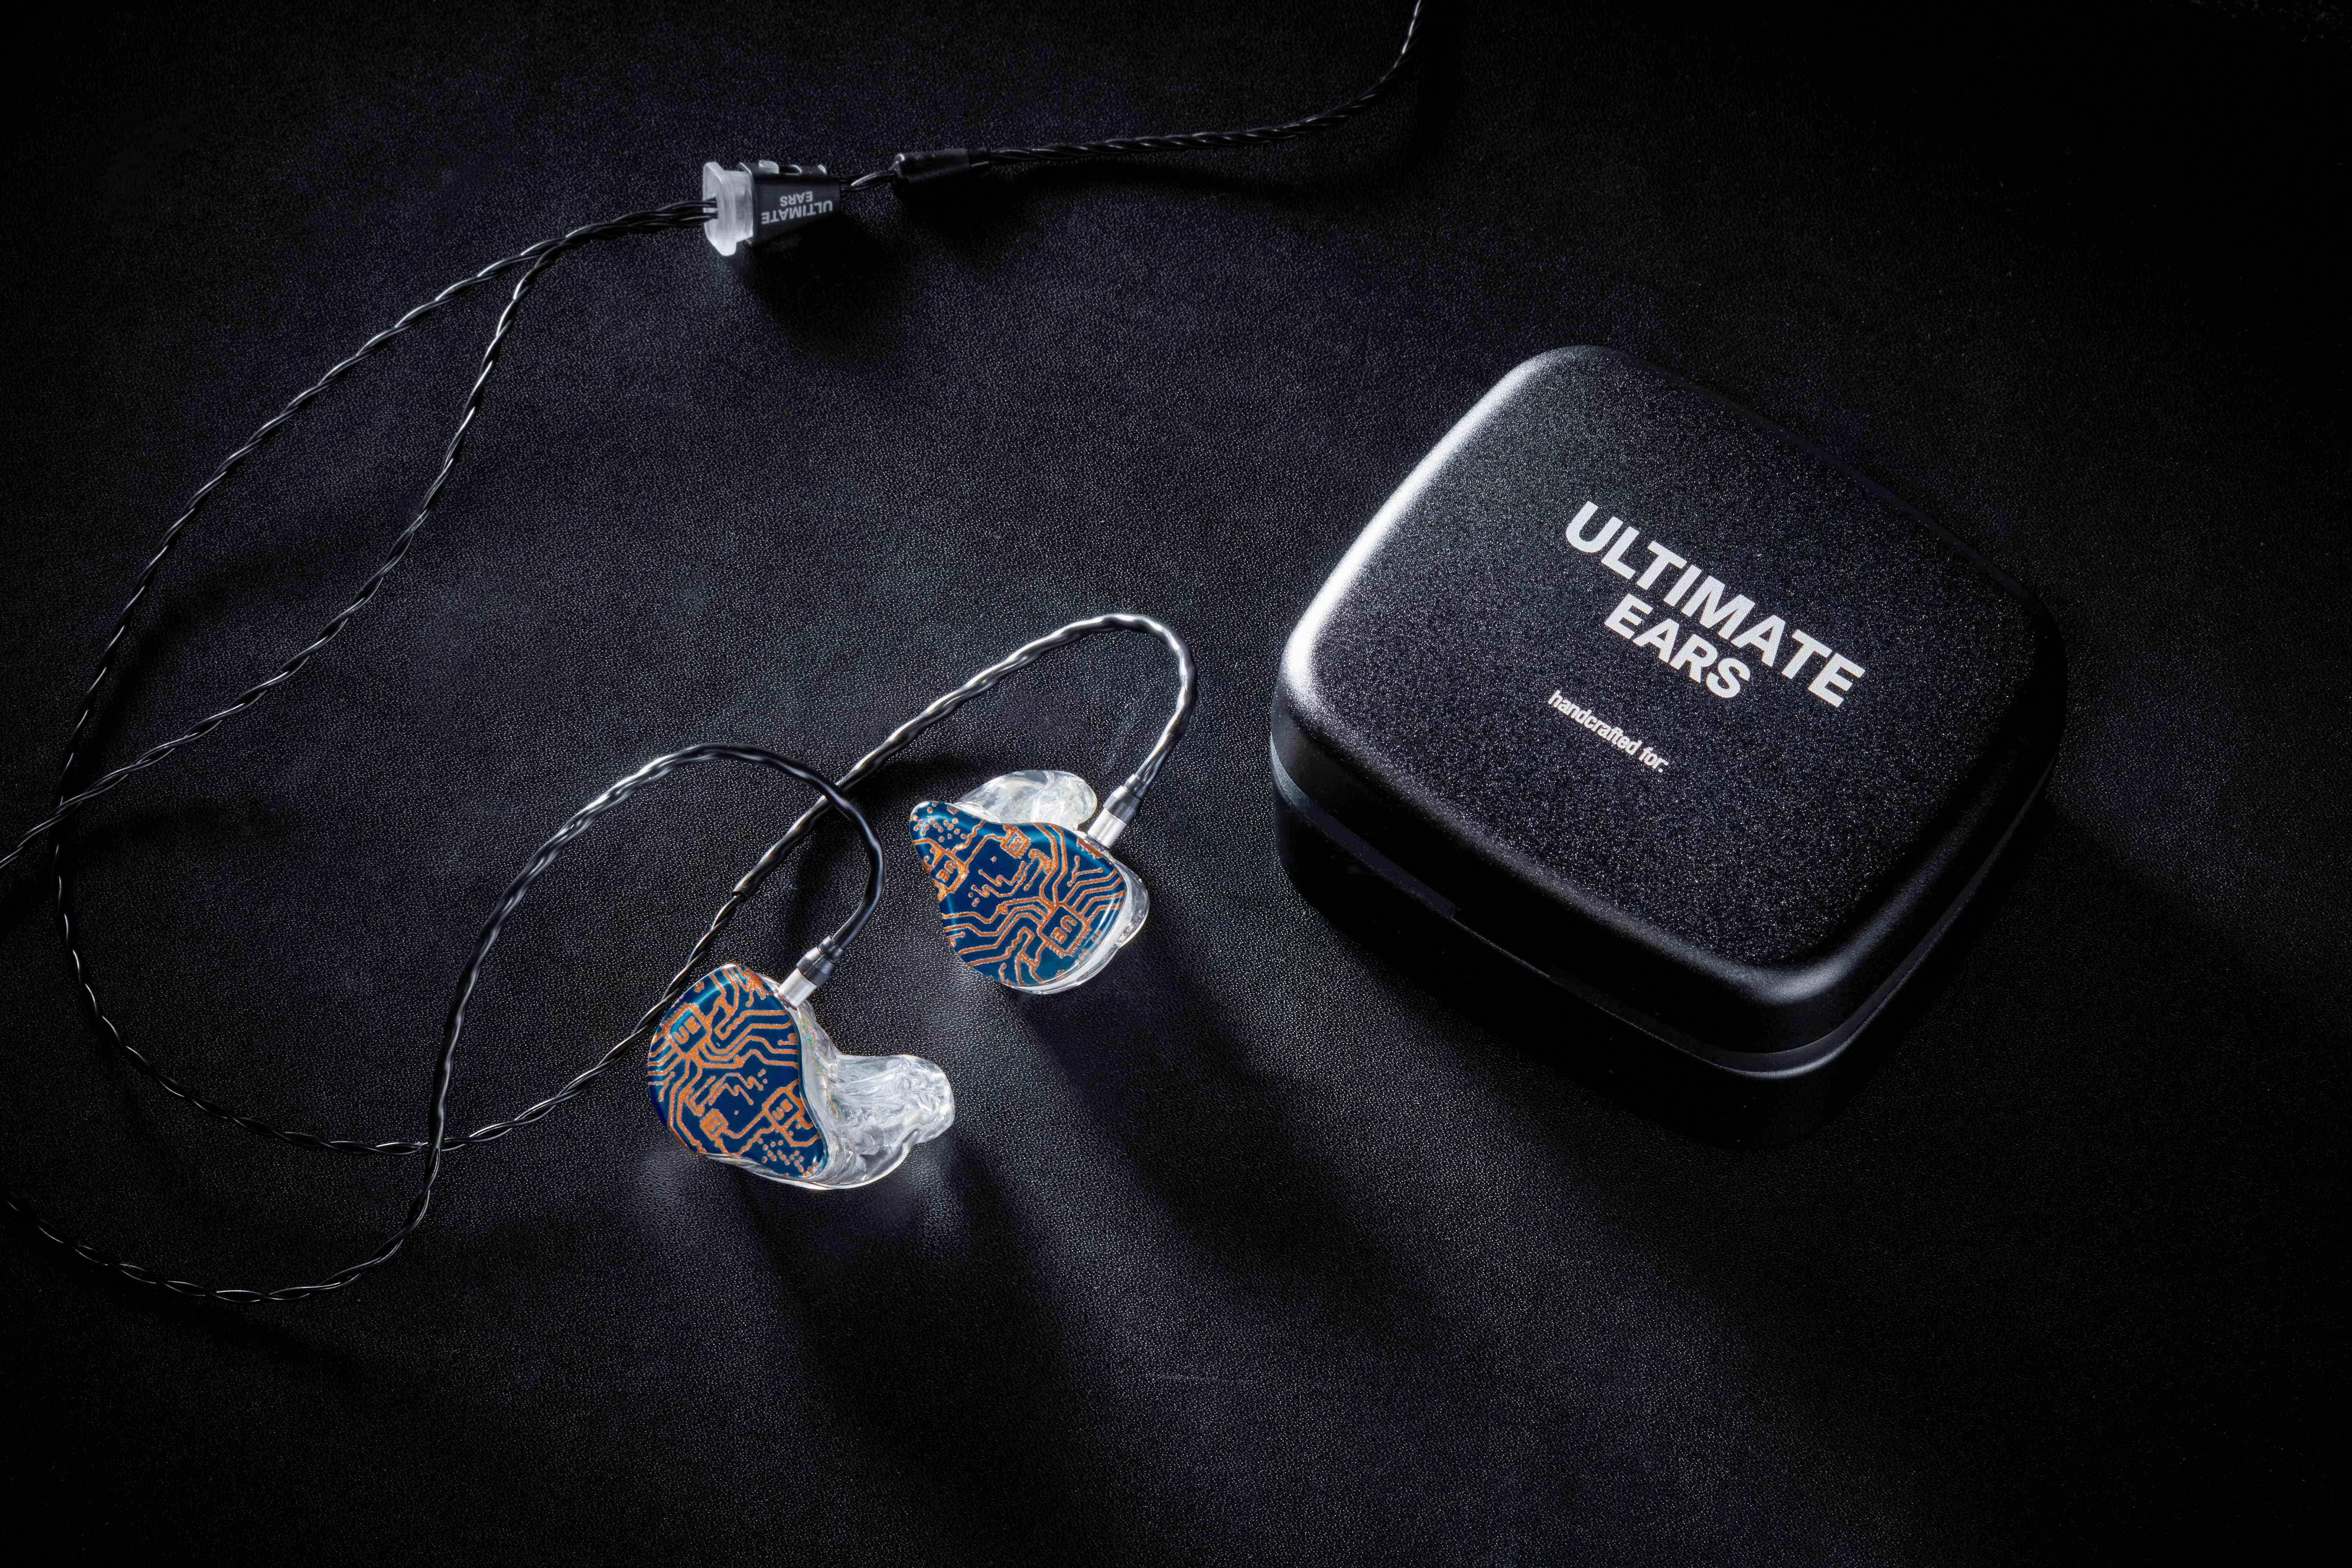 In-ear monitor lays on surface next to case branded Ultimate Ears